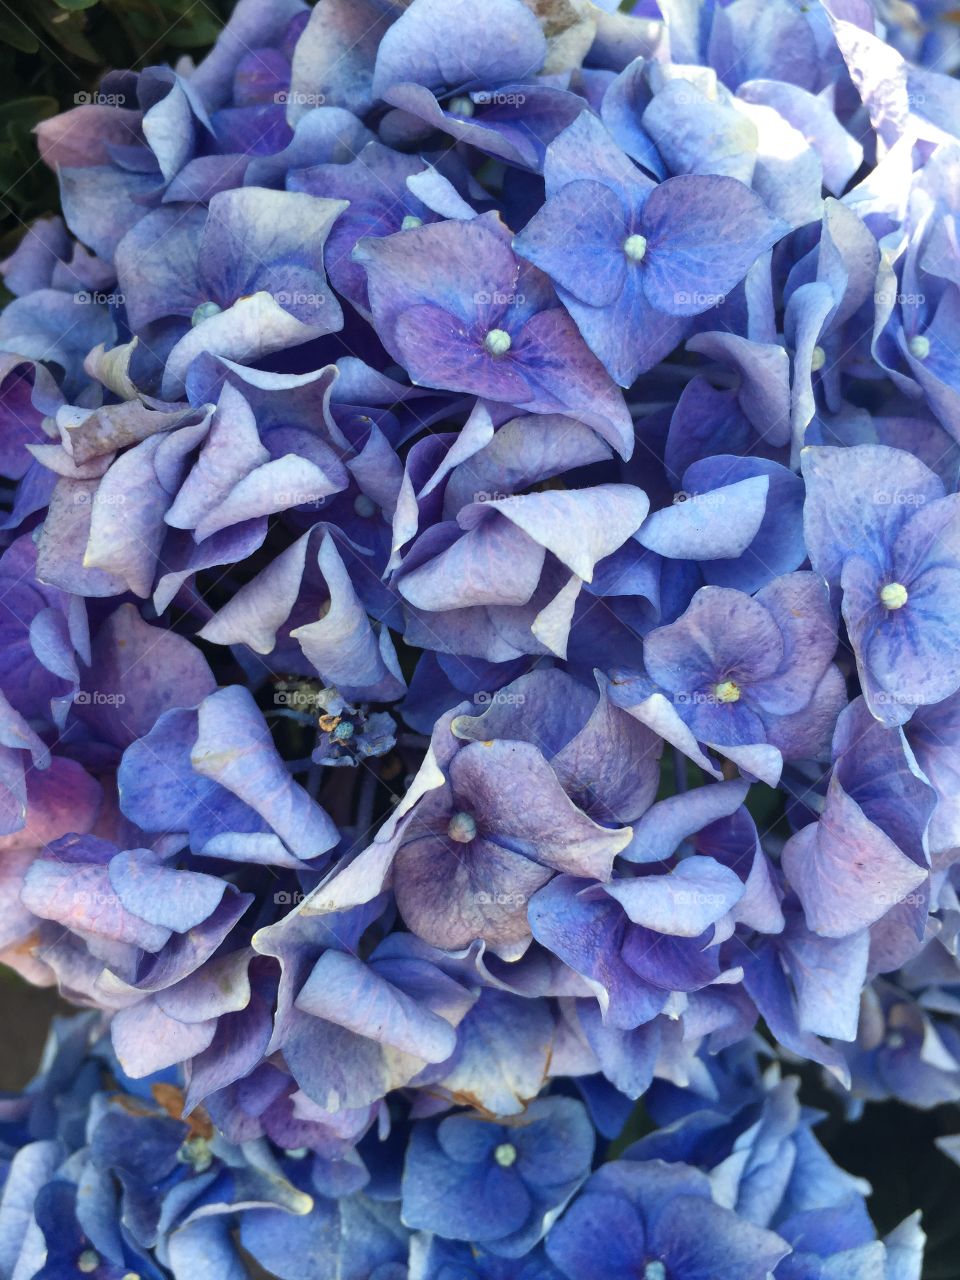 Hydrangea flowers at Wimbledon 2018! Their elegant colors draw attention from everyone. 